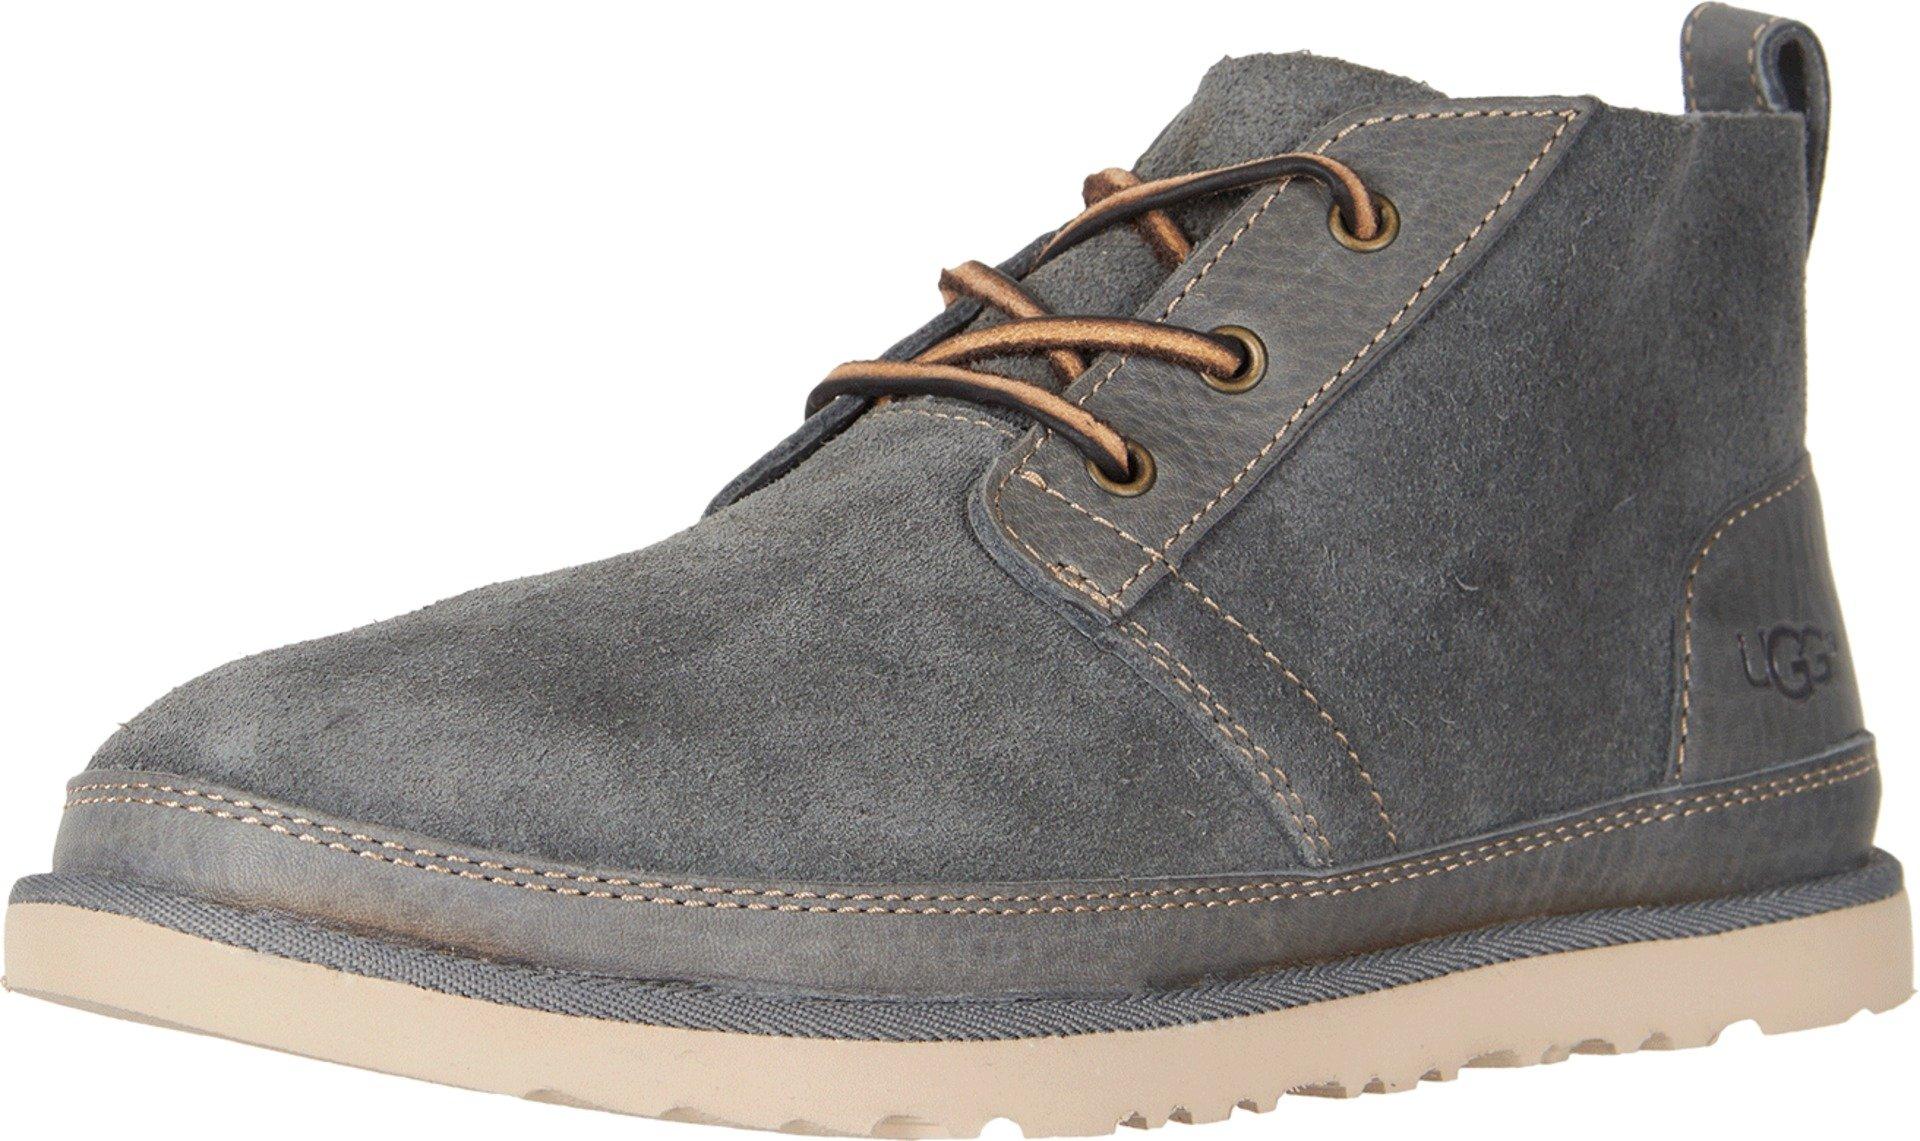 UGG Neumel Unlined Leather in Charcoal (Gray) for Men - Save 4% - Lyst